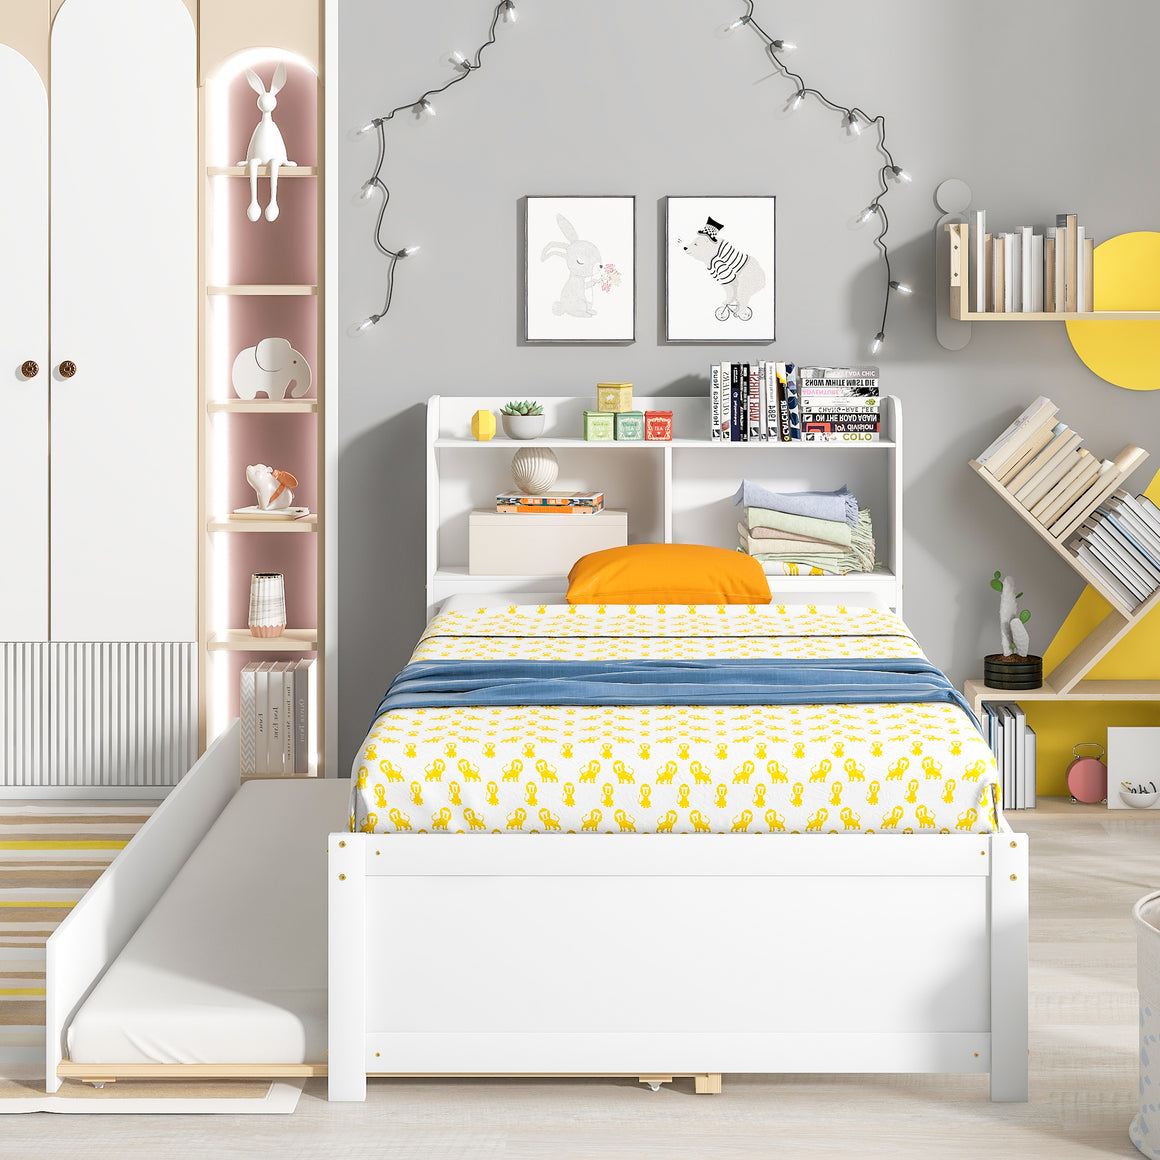 uhomepro Twin Bed Frame with Bookcase Headboard and Trundle, Upgrade Pine Wood Platform Bed Frame for Kids, Modern Kids Bed Furniture for Bedroom, No Box Spring Needed